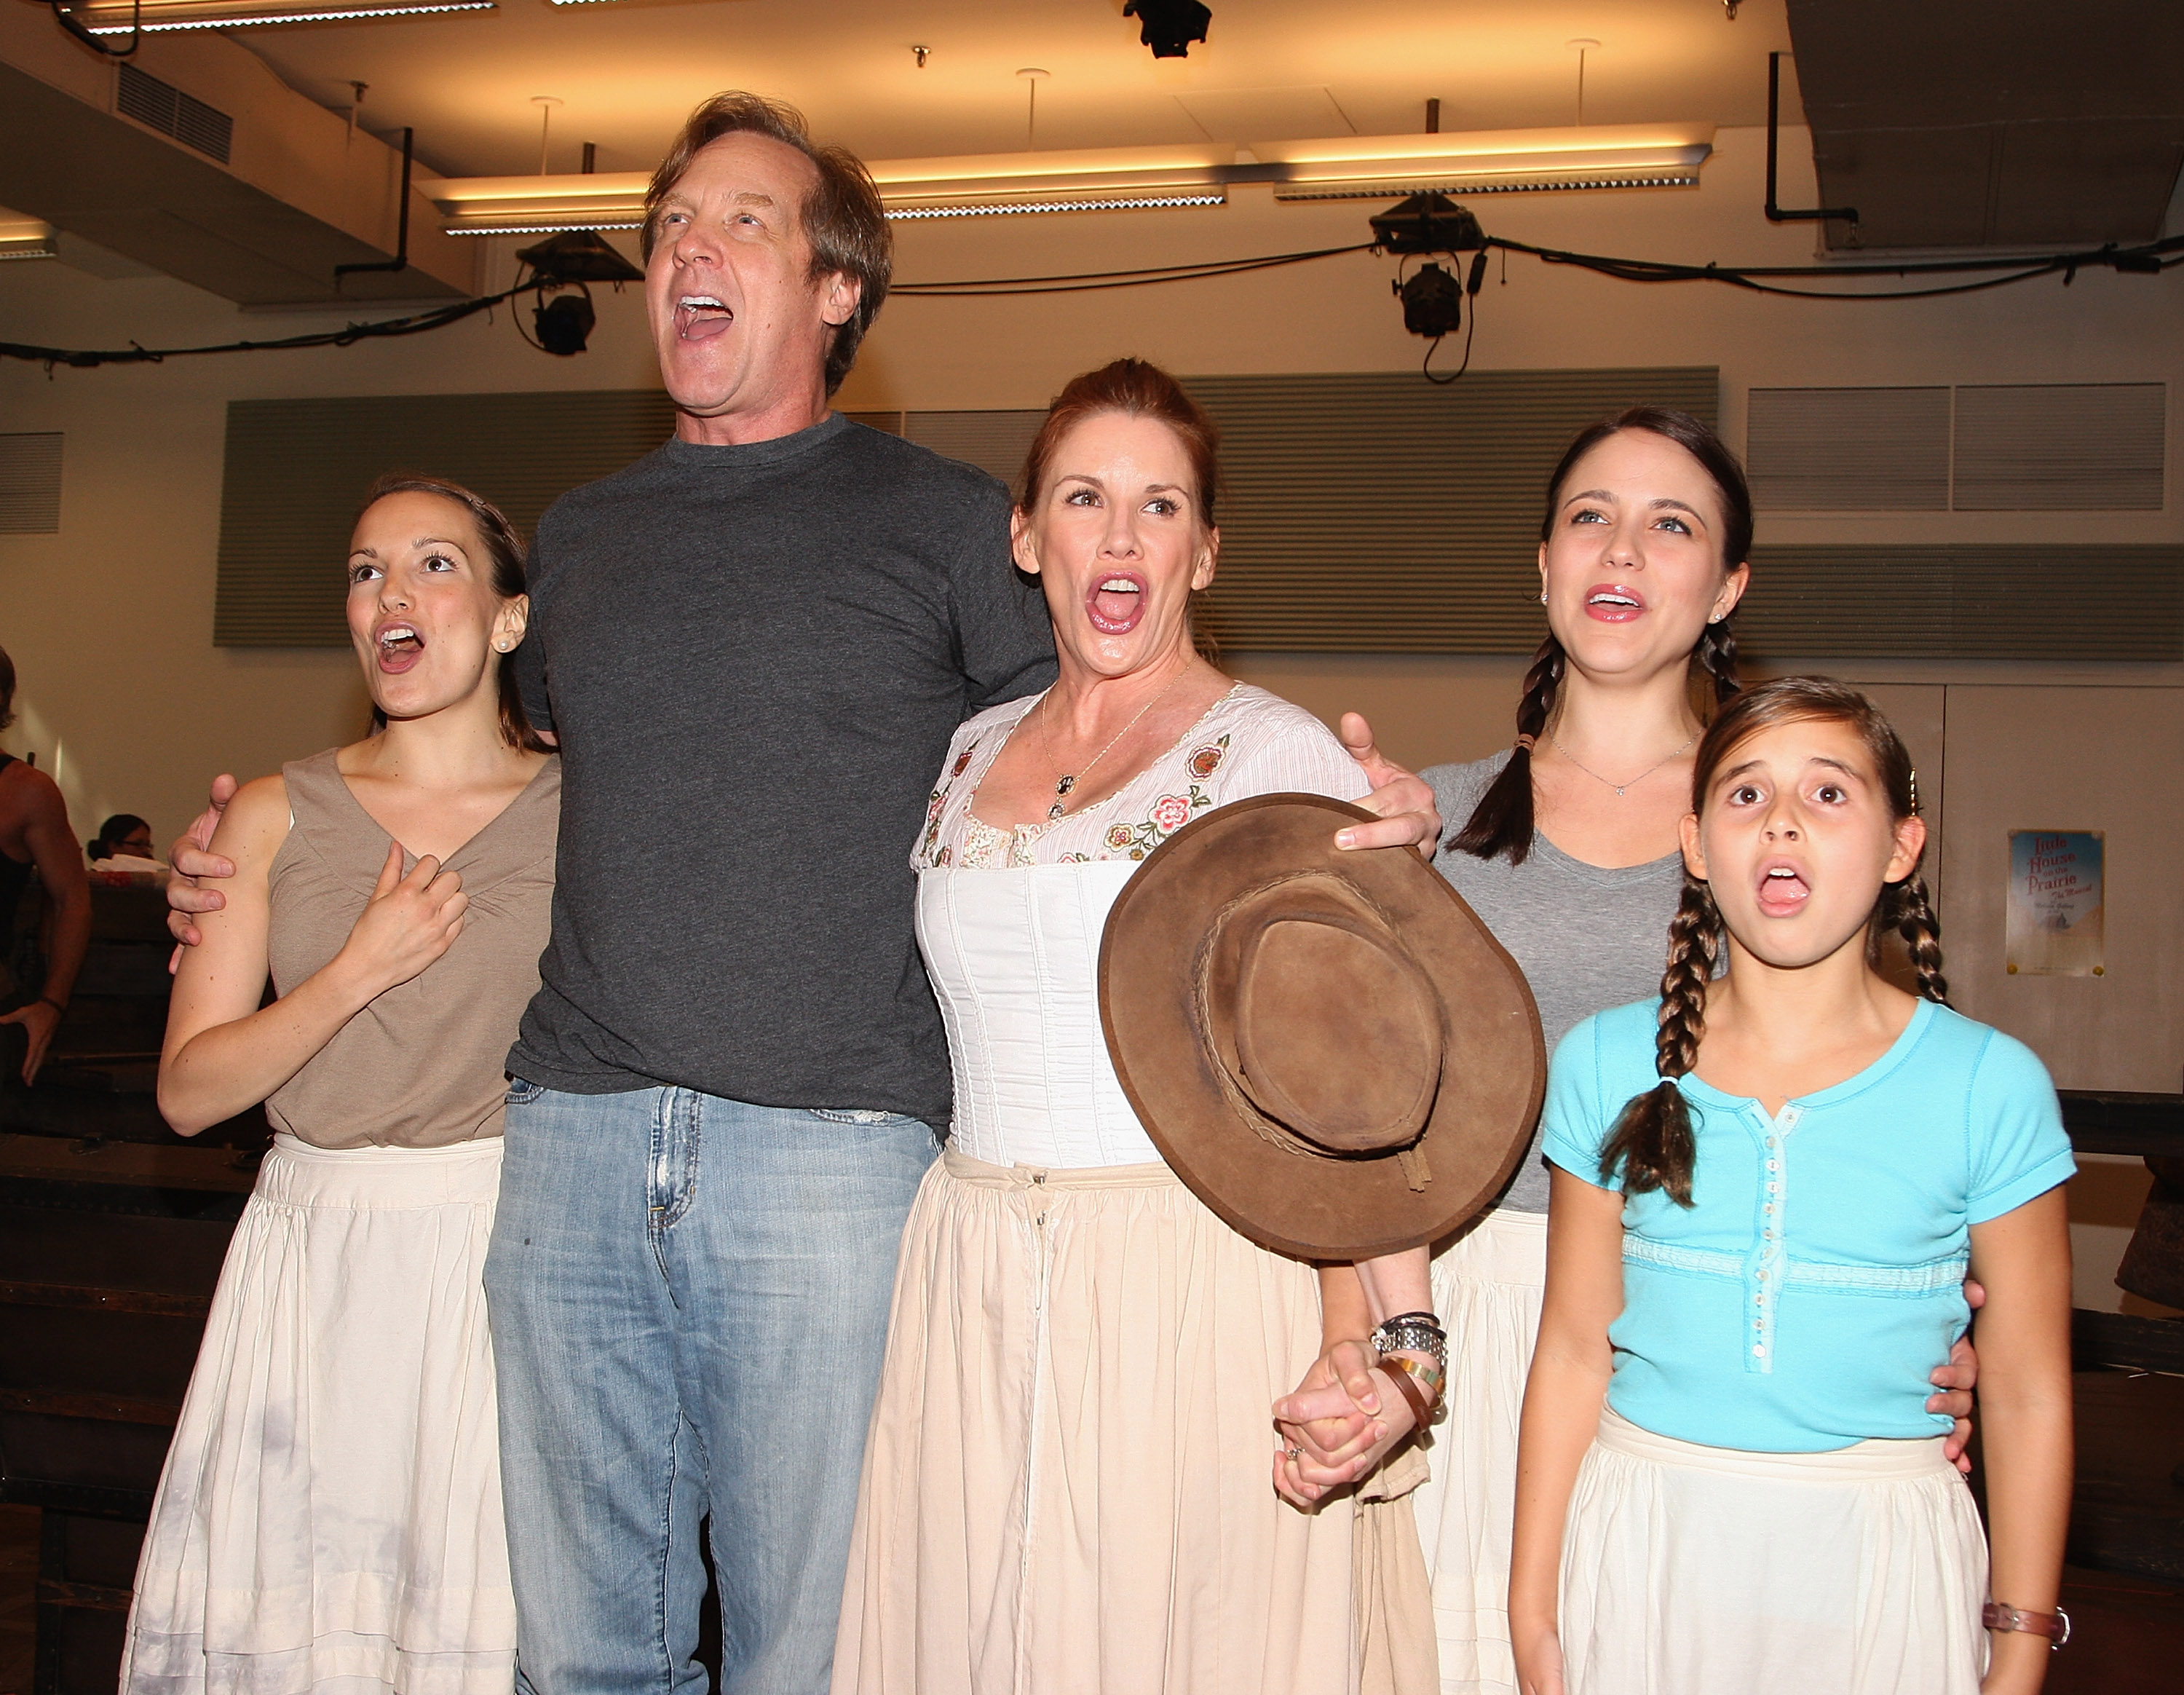 Melissa Gilbert and cast perform during the "Little House On The Prairie The Musical" rehearsal.